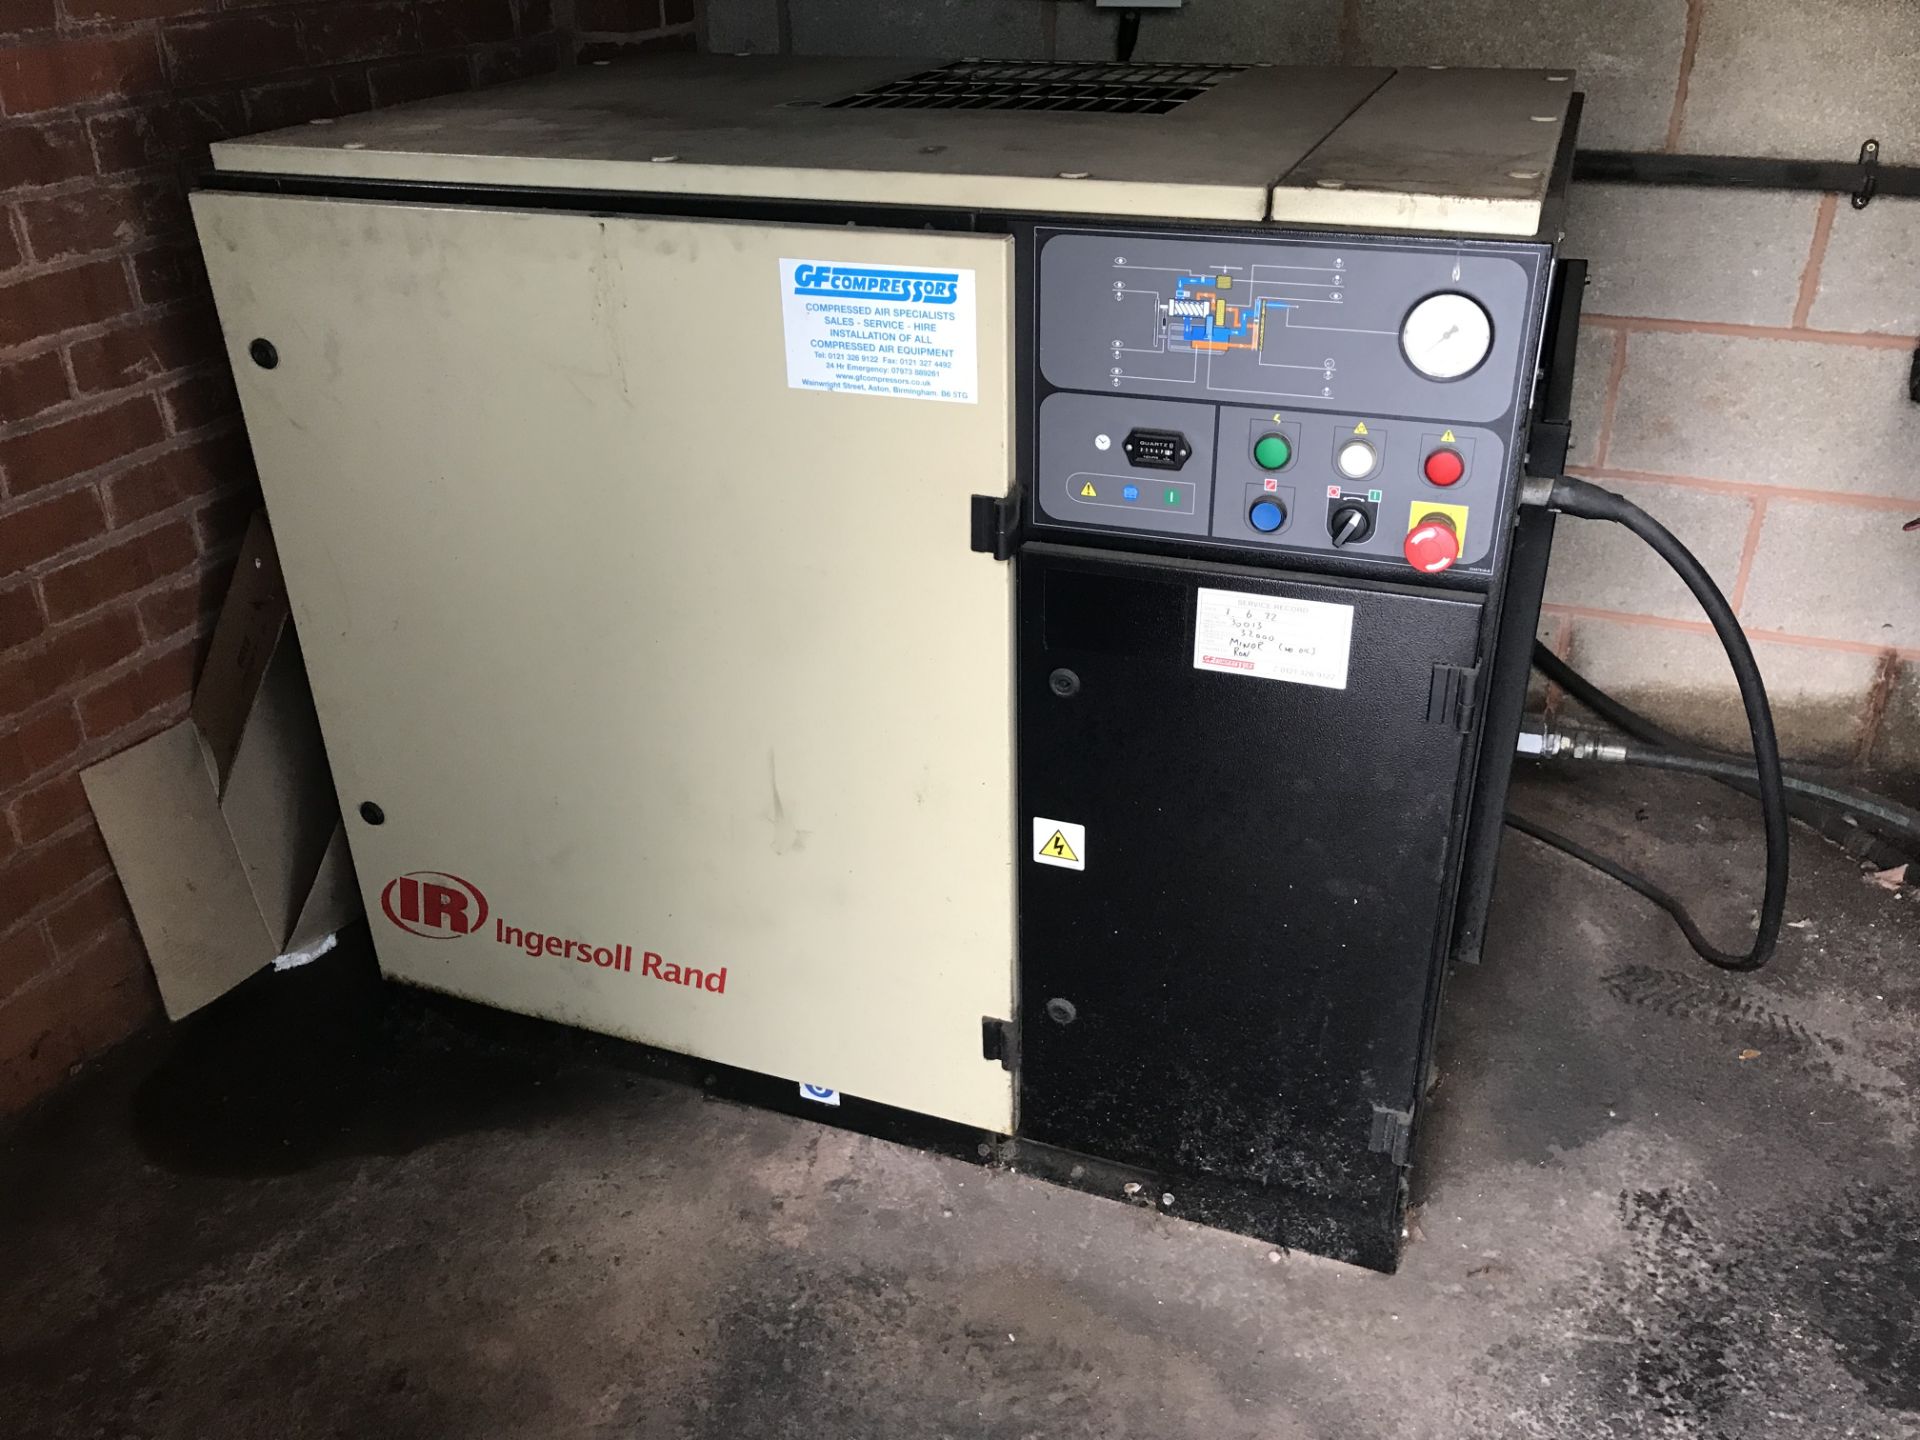 Ingersoll Rand UP5-15-8 Packaged Air CompressorSerial No. UCV1011250 (2016)